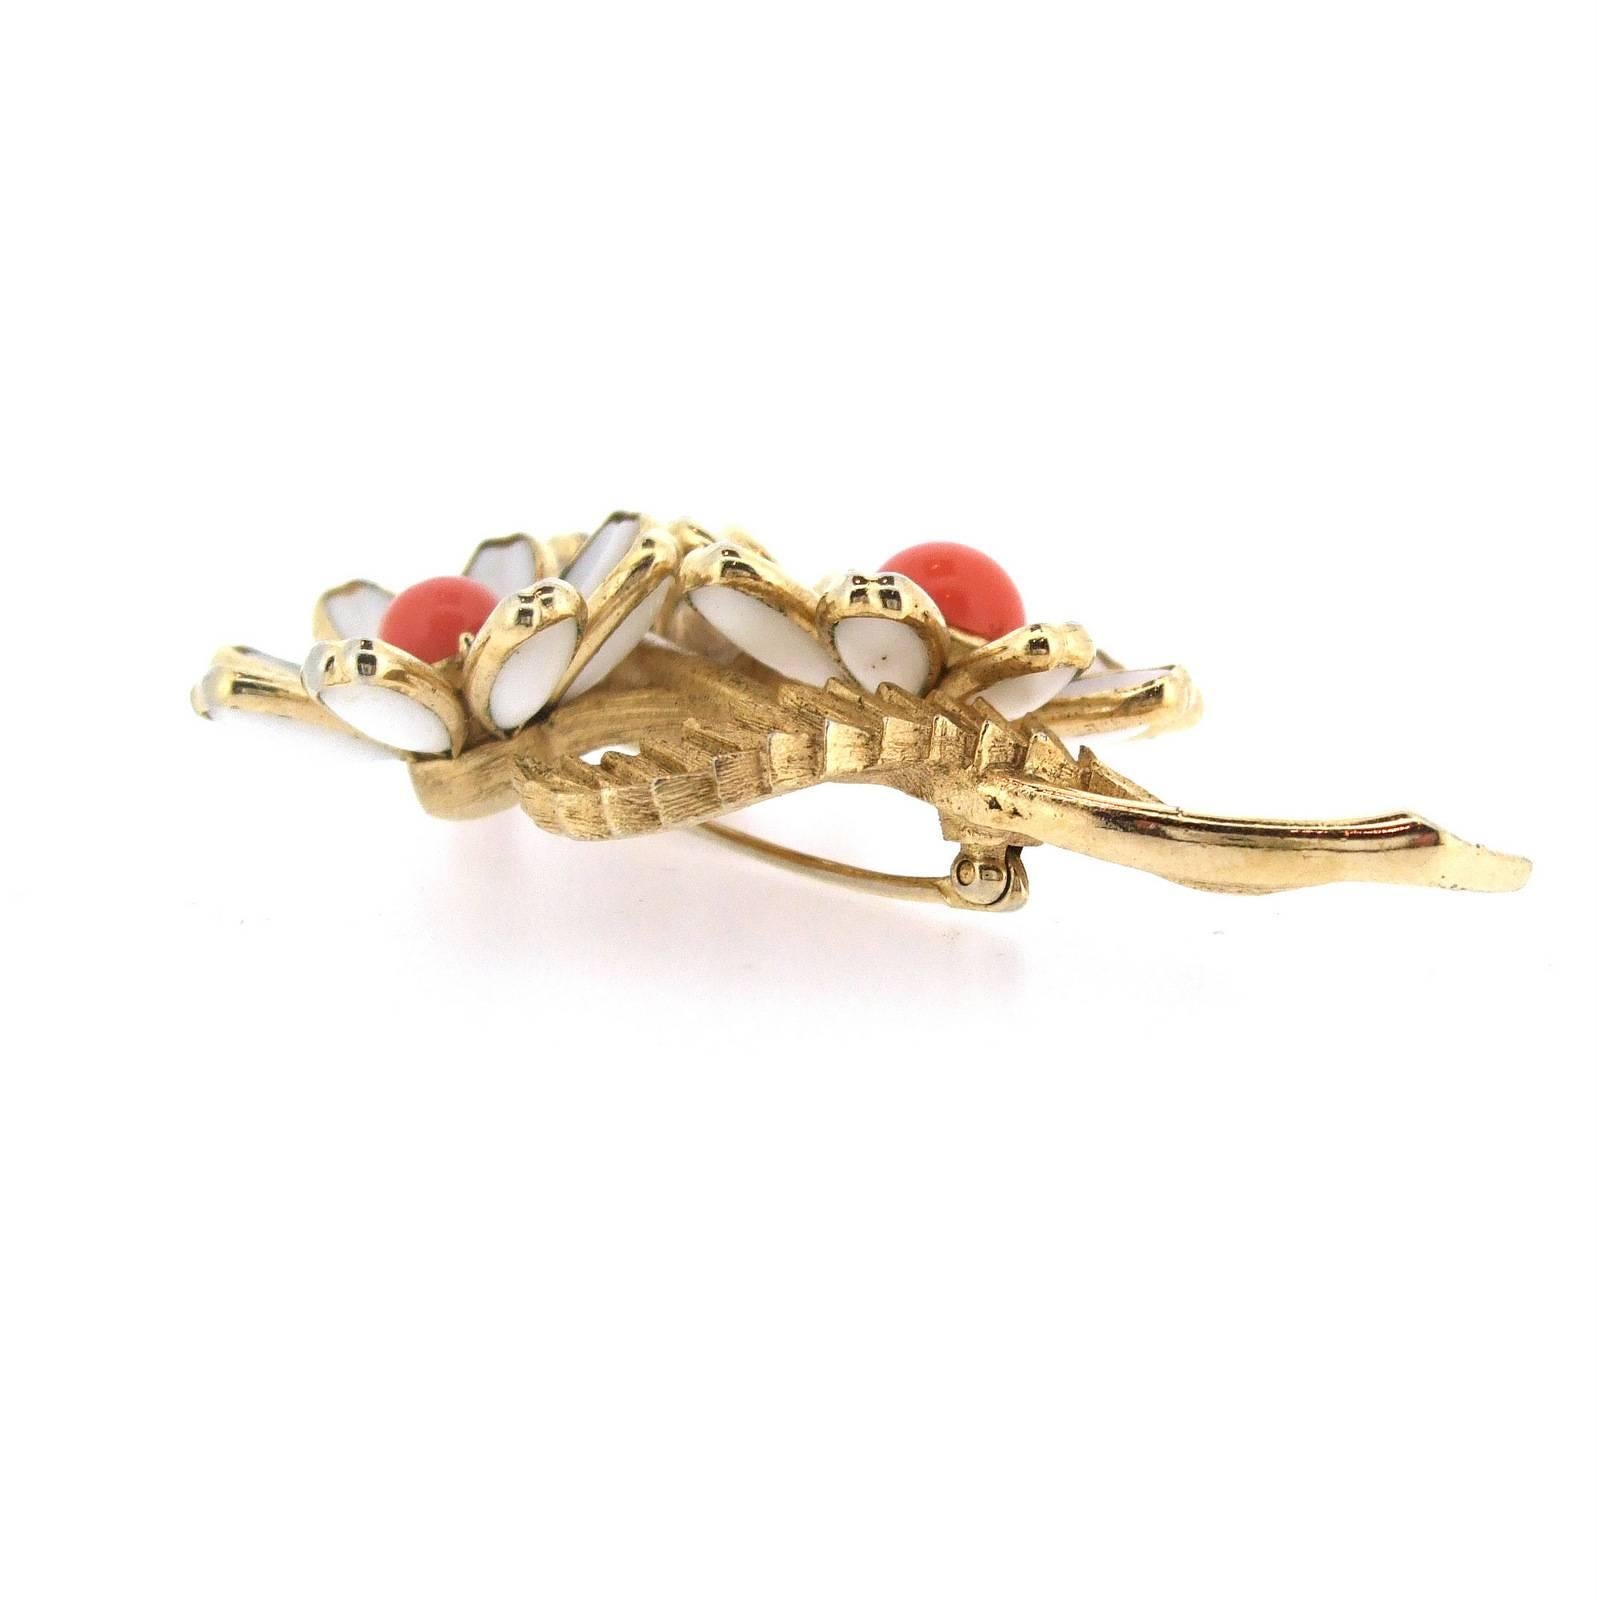 A beautiful flower brooch by Trifari with milk white and coral glass stones.

Trifari was founded in the USA by Italian Gustavo Trifari in 1910. Chief designer of Trifari between 1930 and 1968 was Alfred Philippe, who had previously designed for